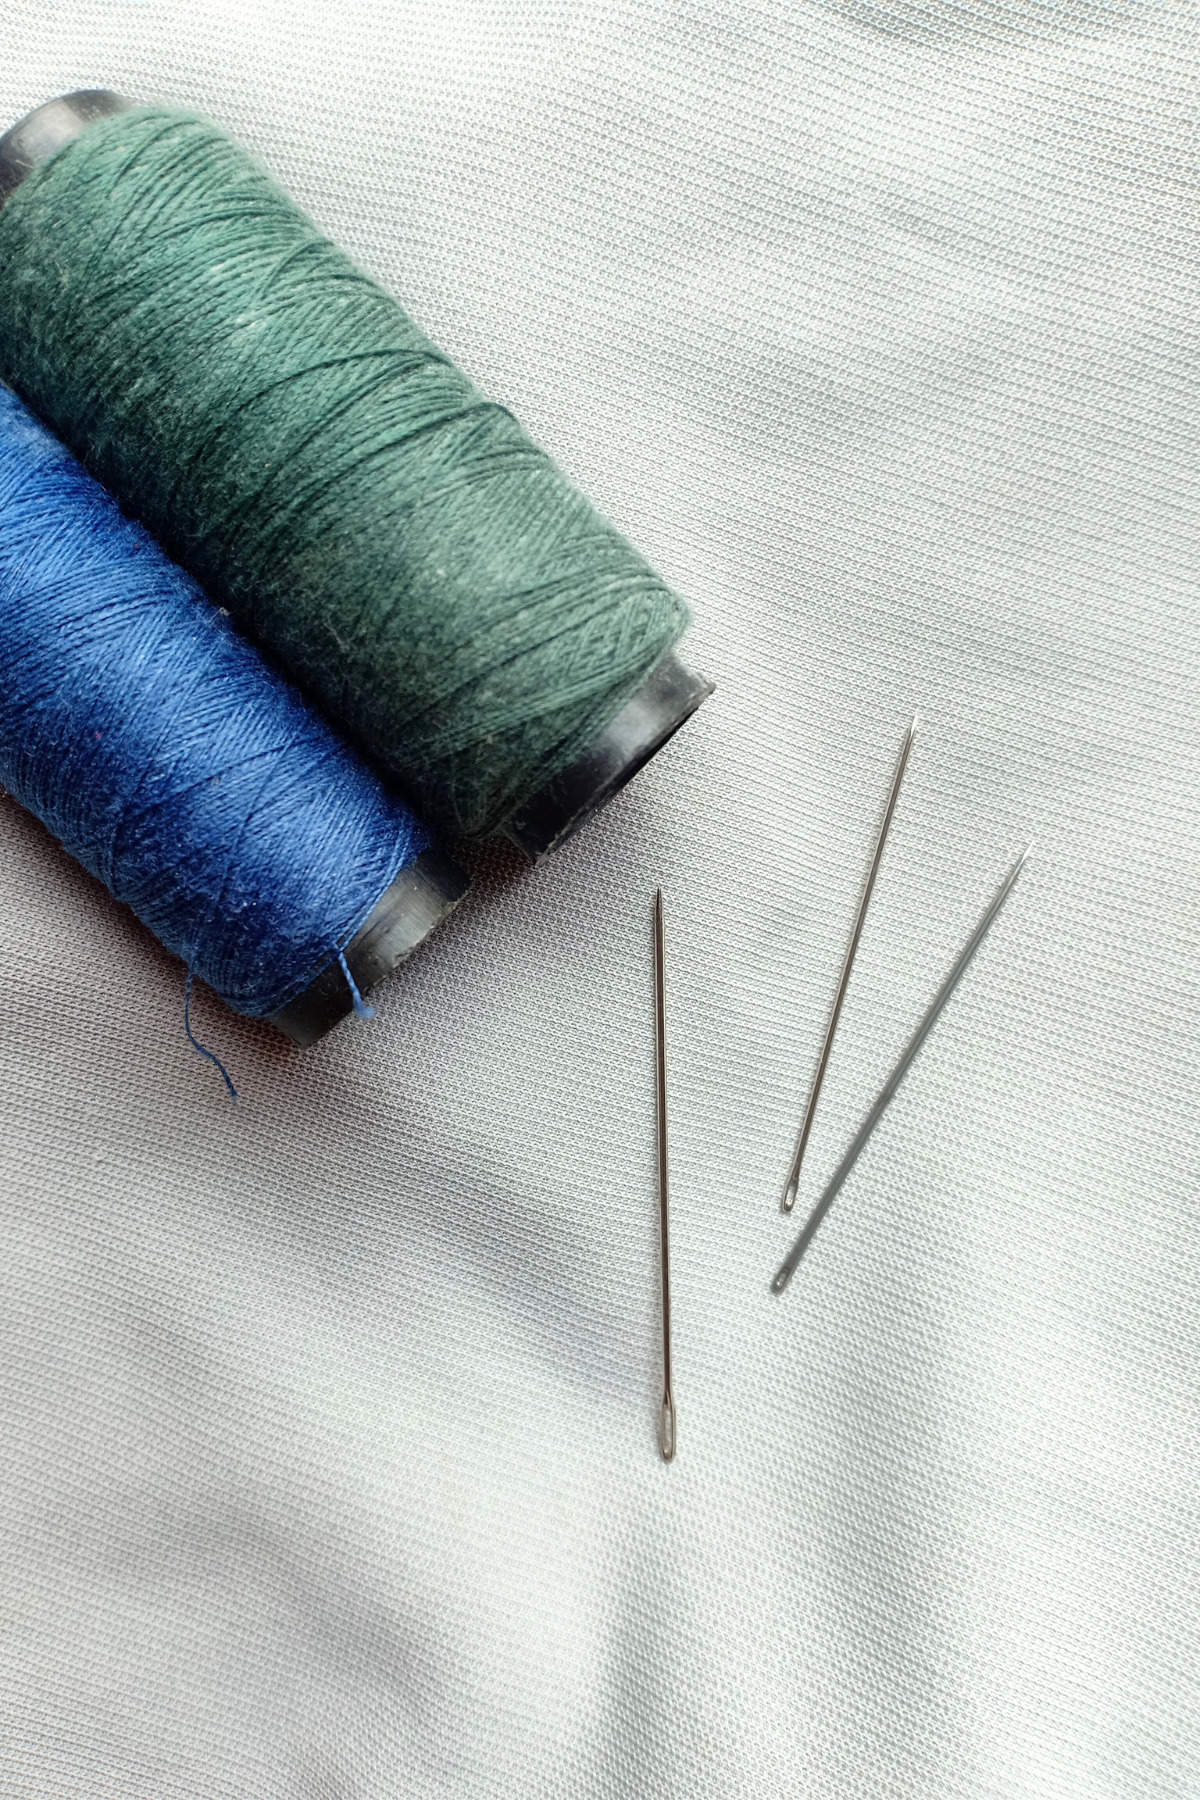 Image shows hand sewing needles next to a green thread over a grey background.